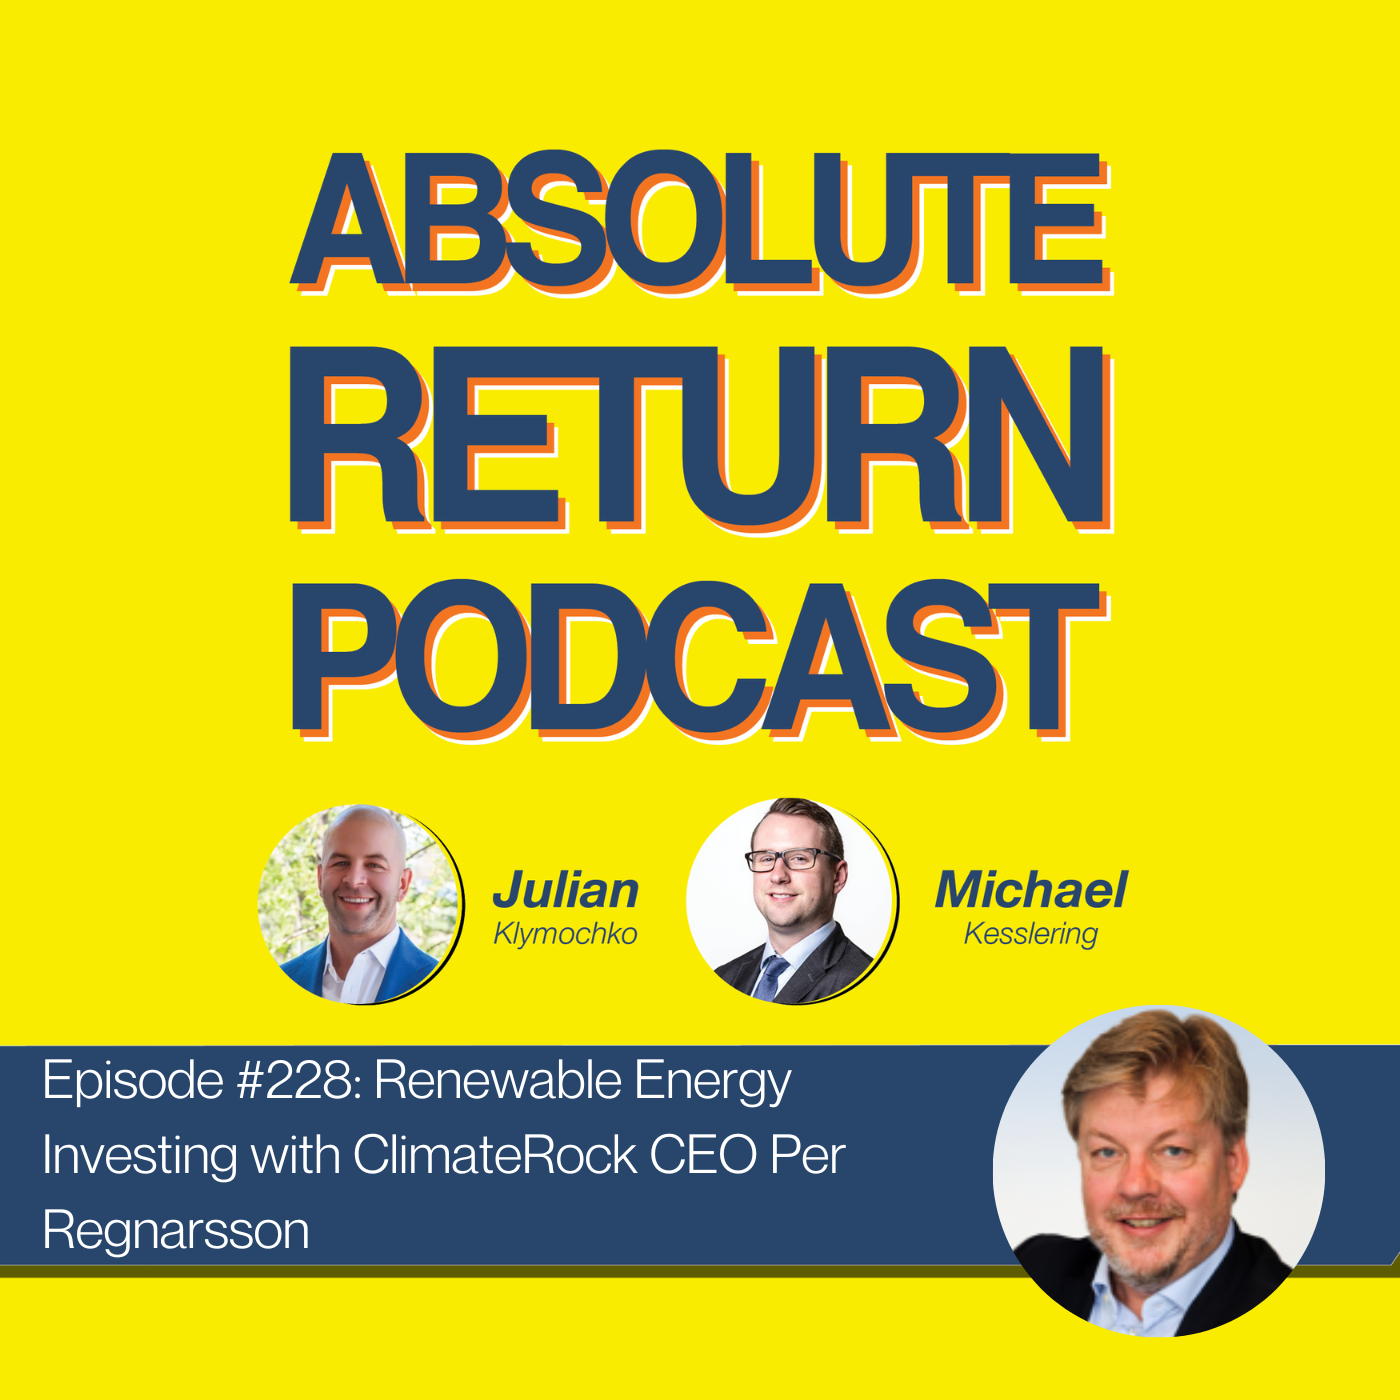 #228: Renewable Energy Investing with ClimateRock CEO Per Regnarsson